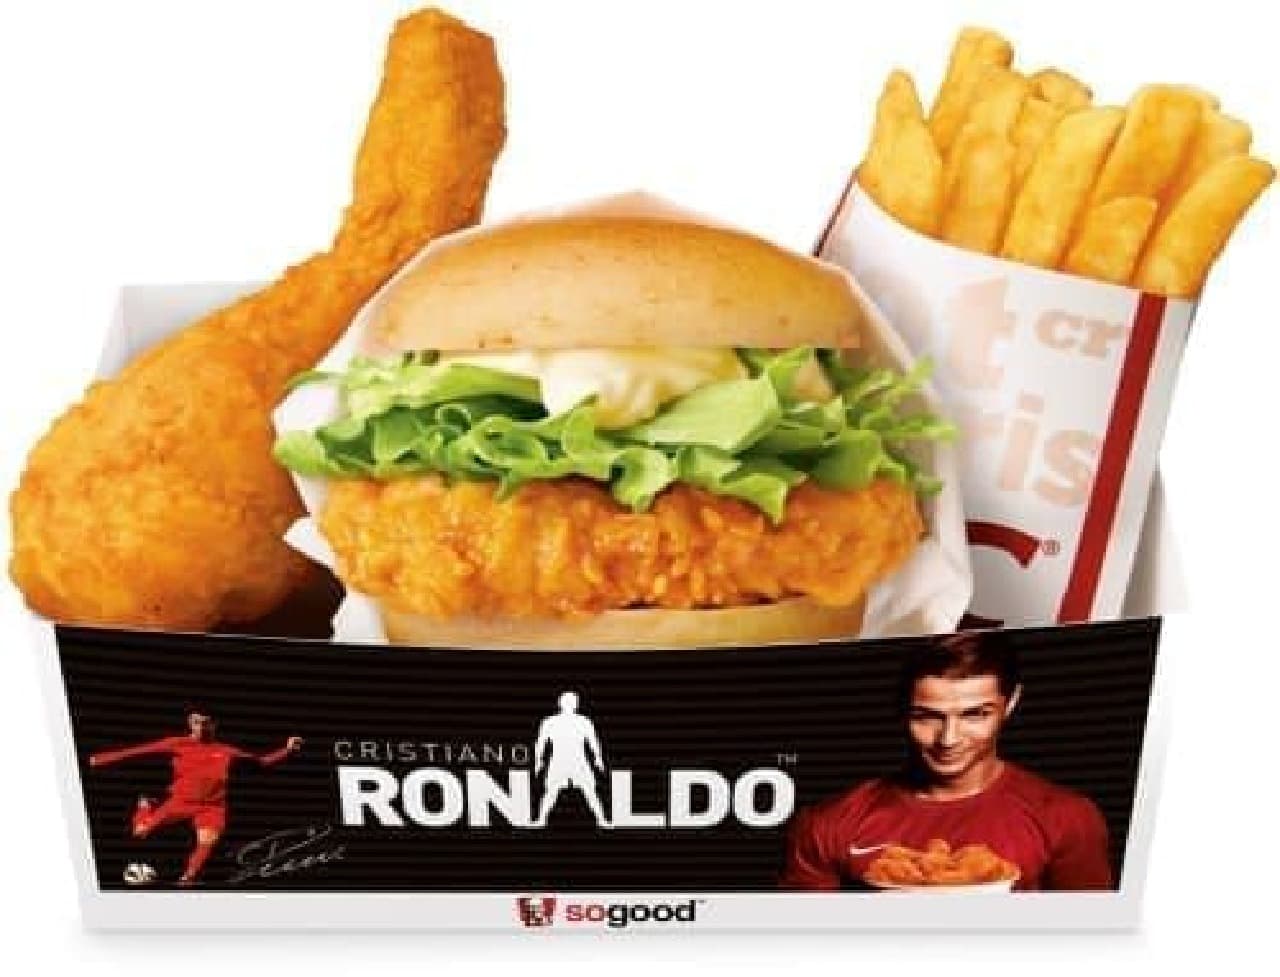 Ronaldo is on the package! !!